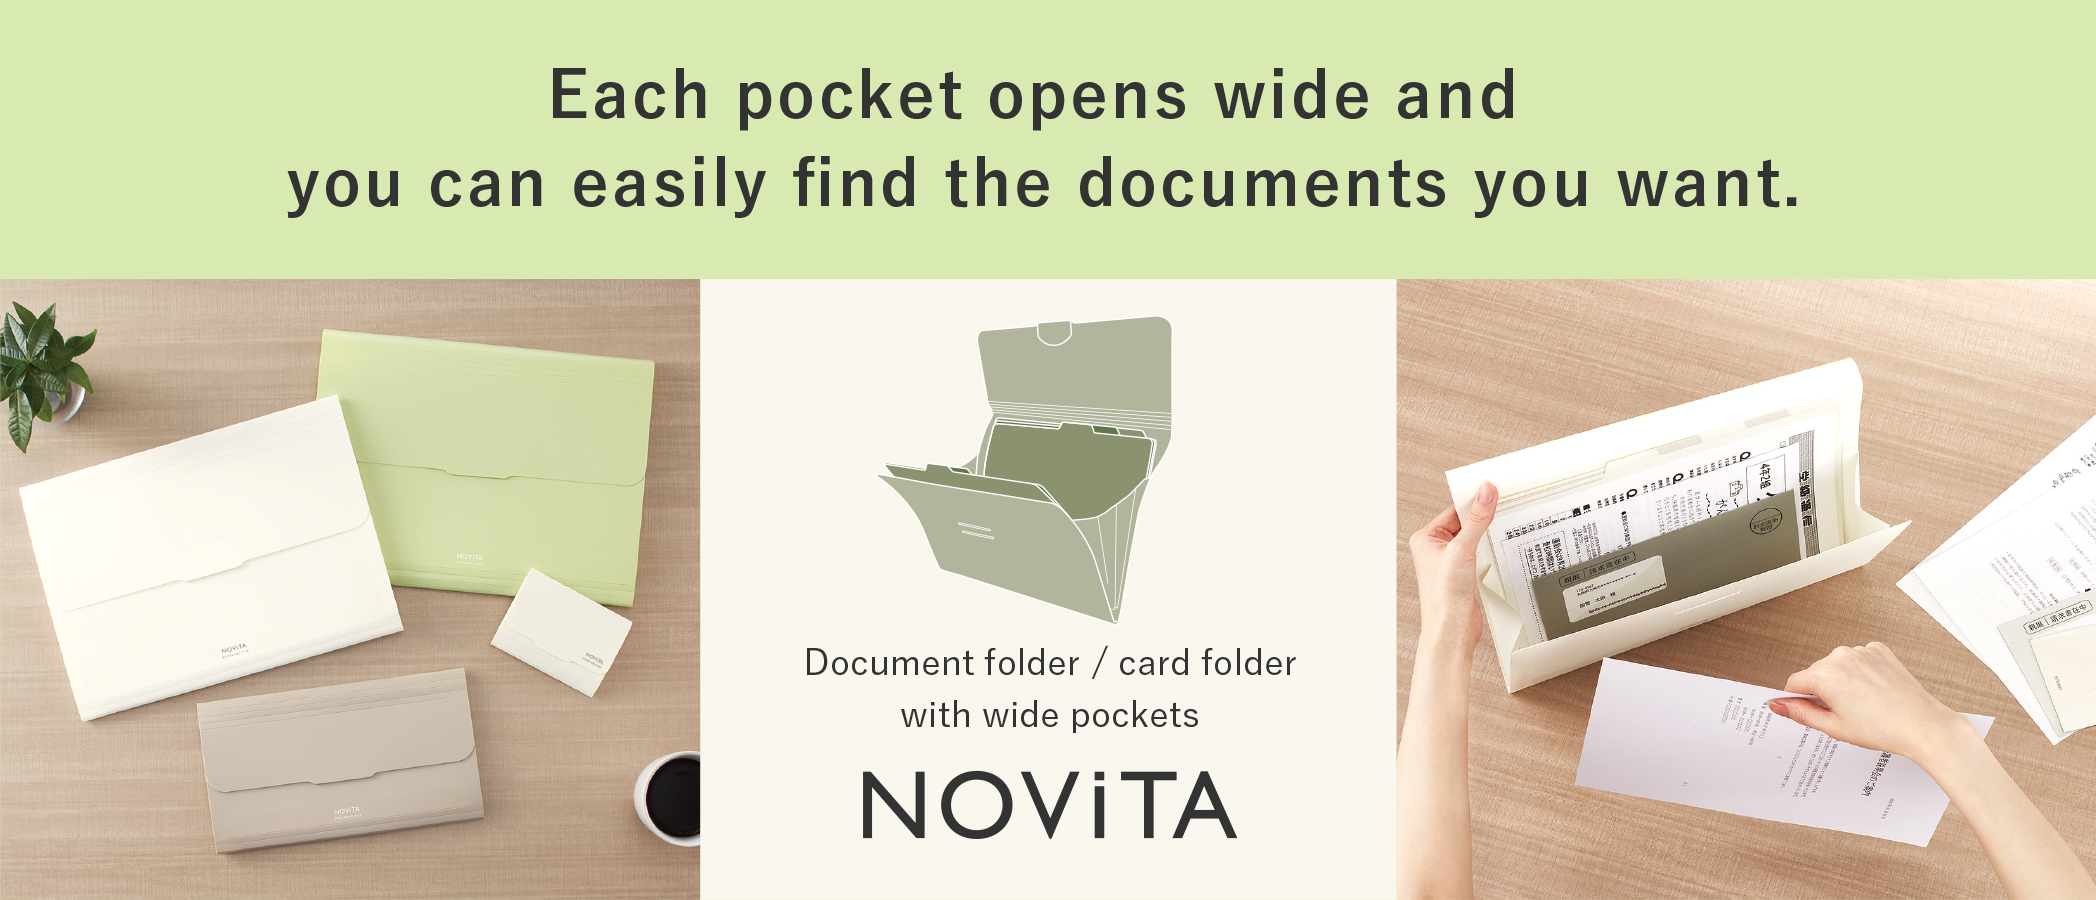 Each pocket opens wide so you can easily find the documents you want Document file/card holder with wide pockets NOViTA